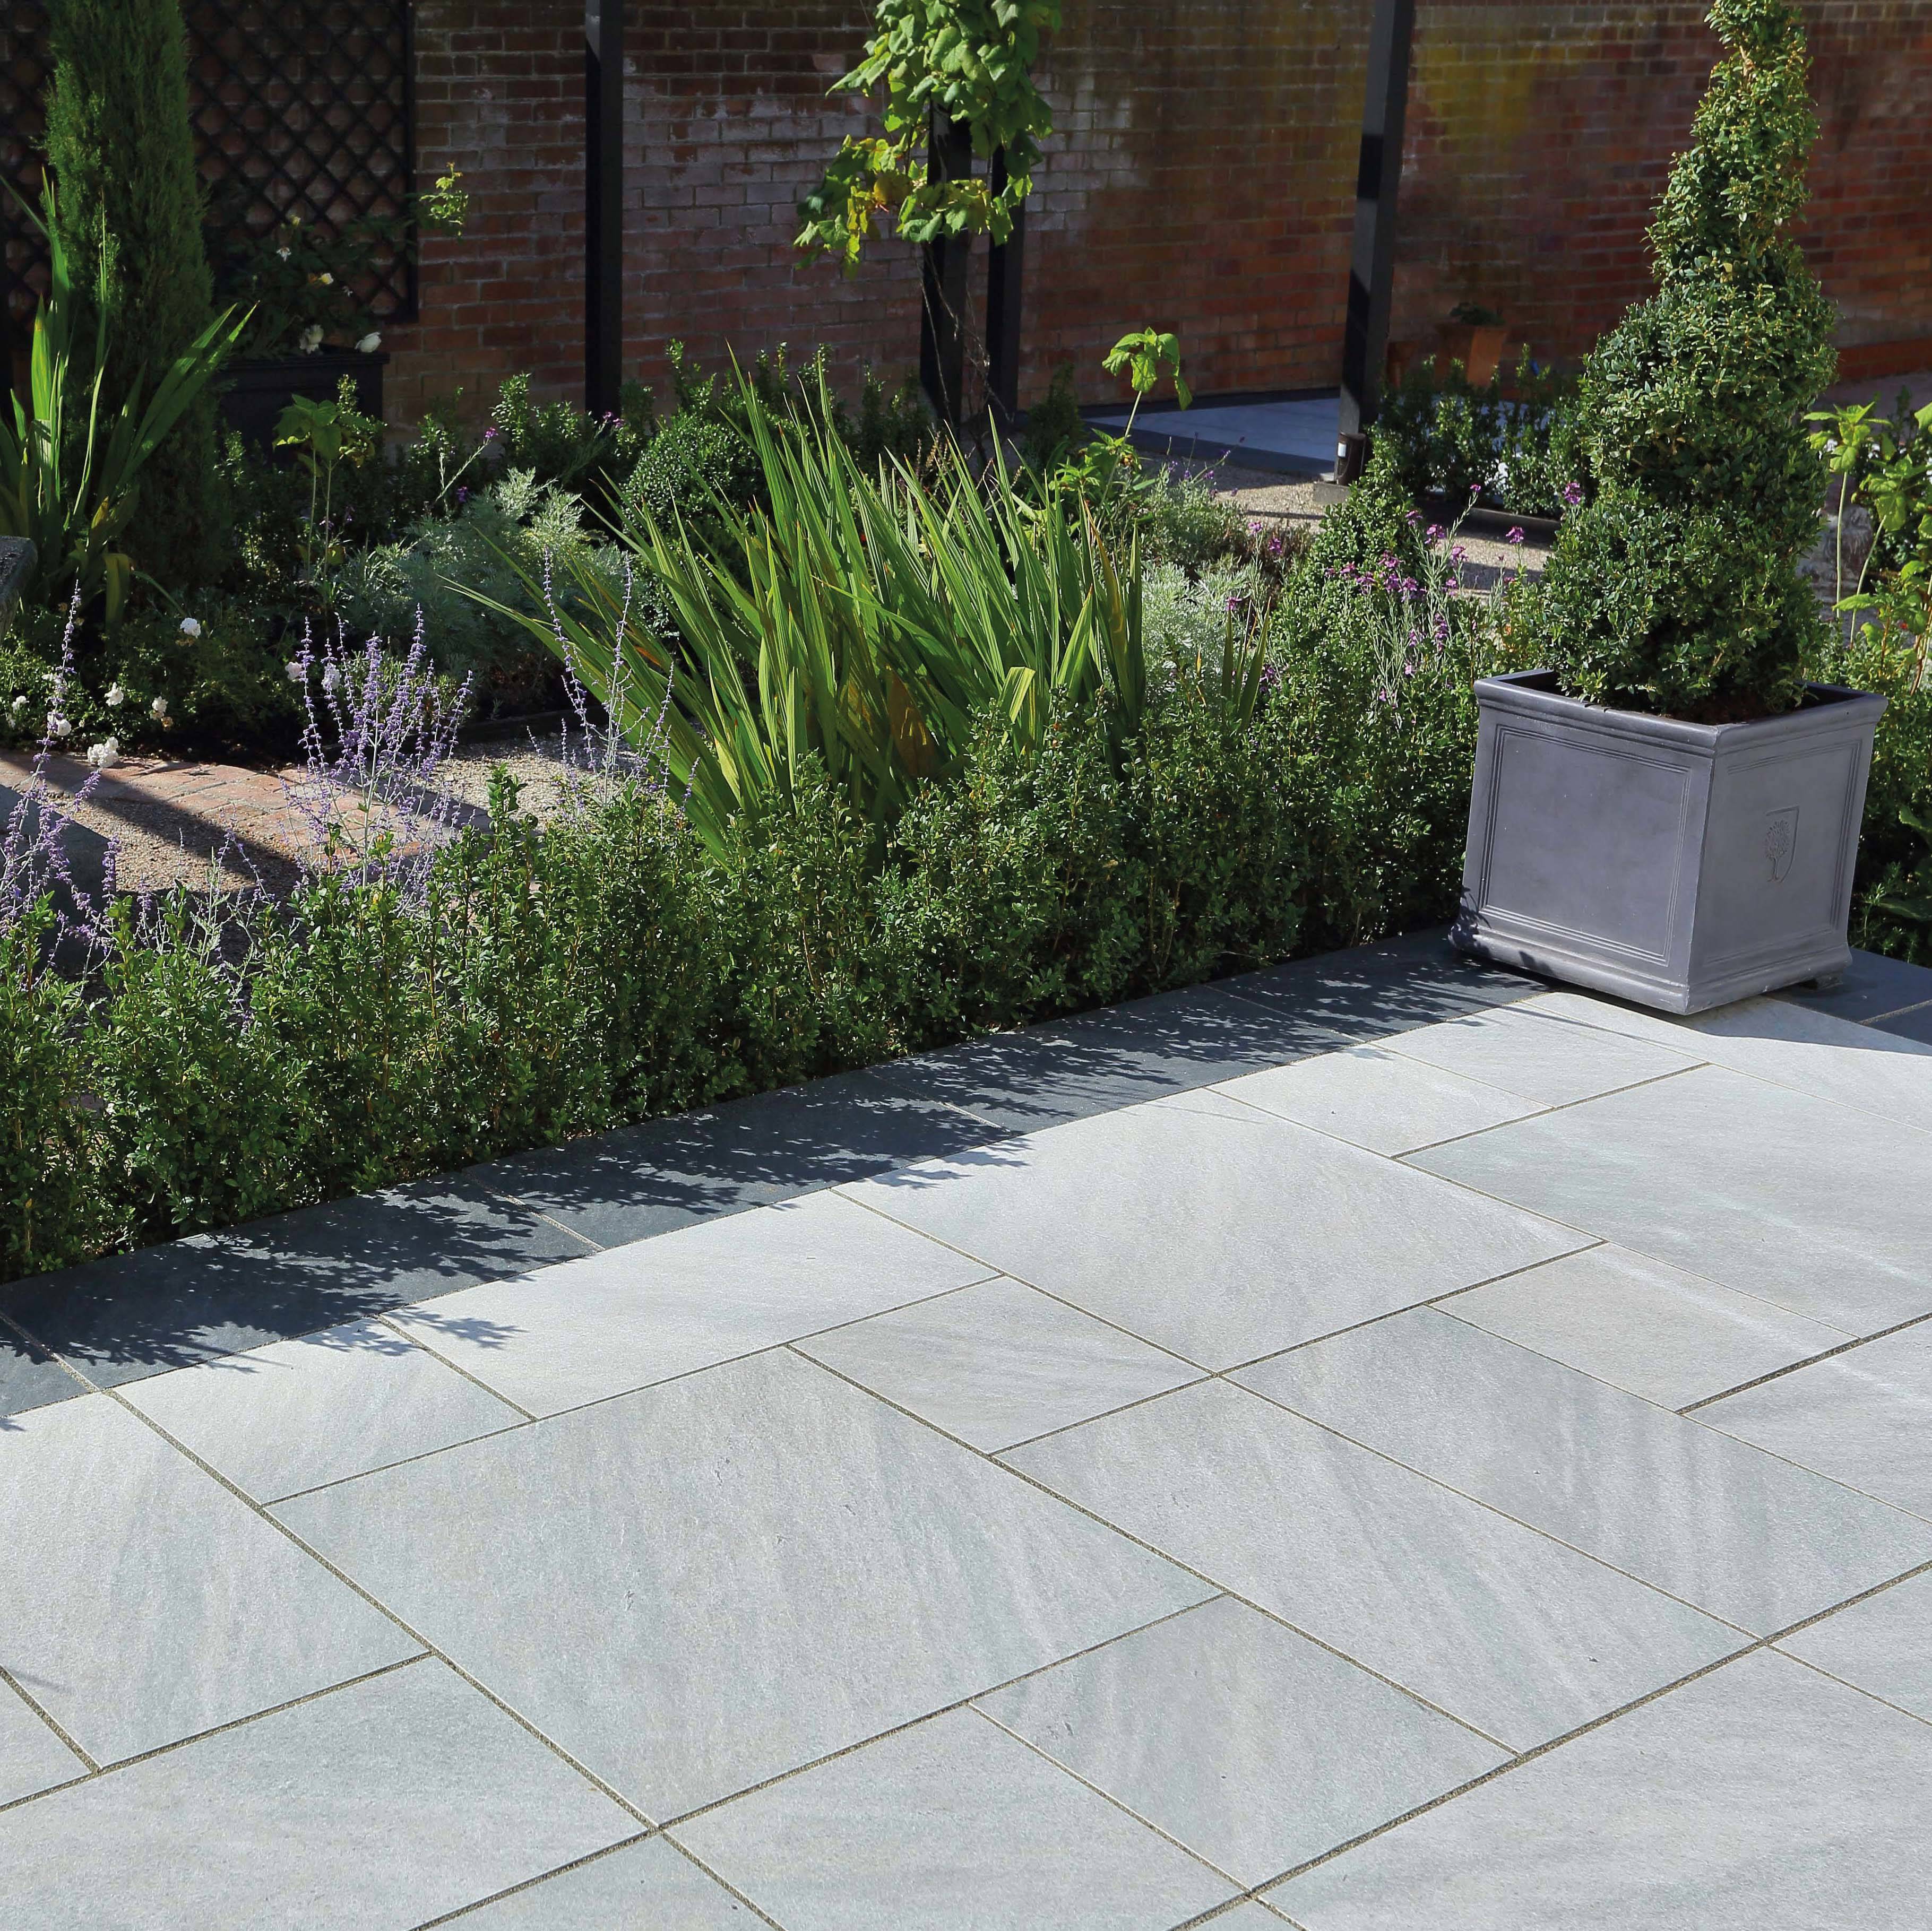 The Bradstone Aspero Silver Grey looks sleek and elegant. The Silver Grey tone is on trend and will be unaffected by weather conditions.